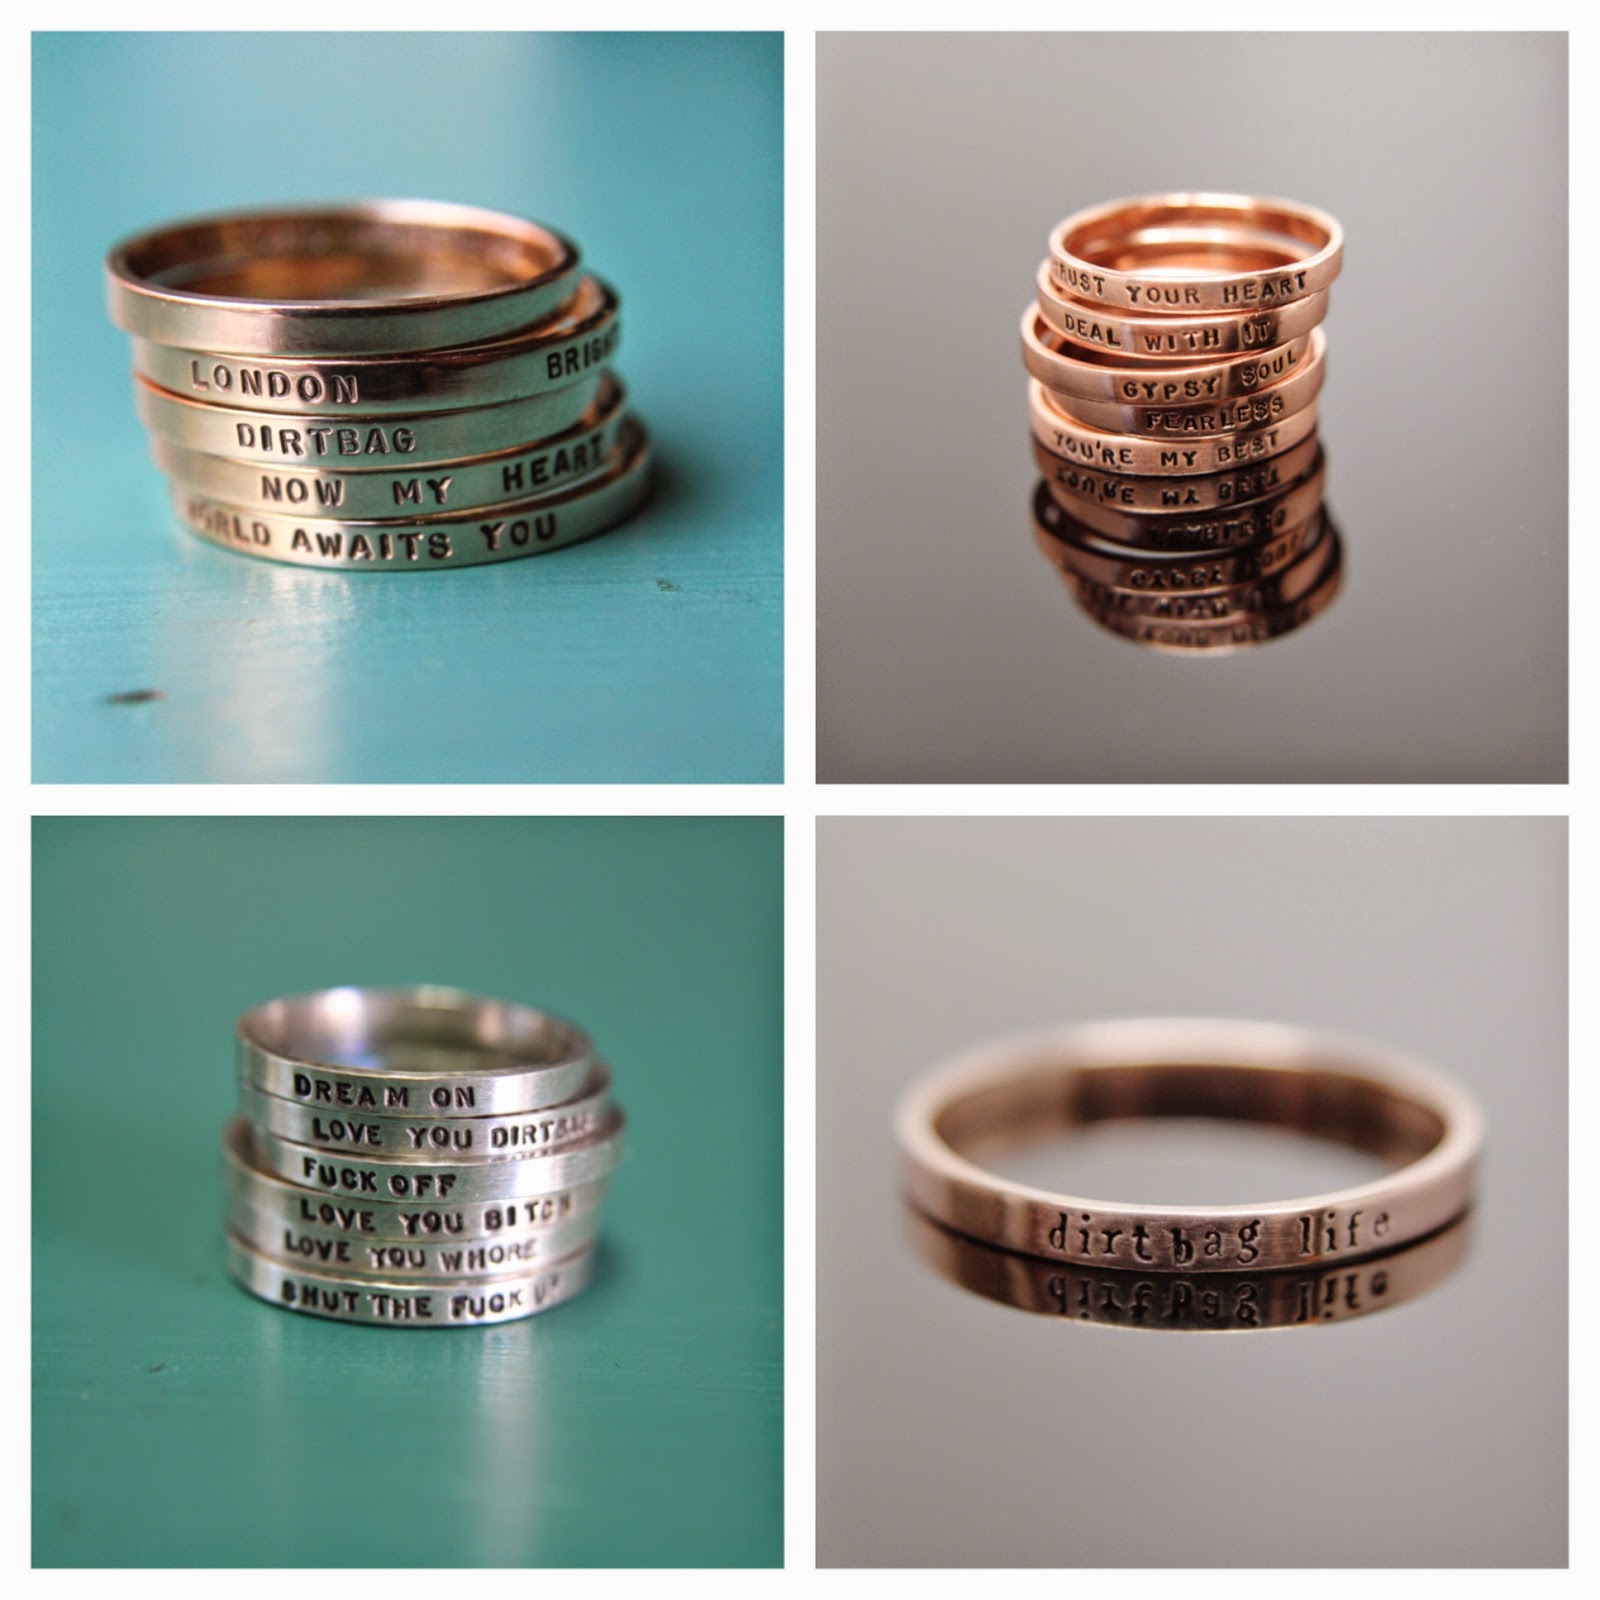 https://www.etsy.com/shop/MissNovemberStudio/search?search_query=stamped+ring&order=date_desc&view_type=gallery&ref=shop_search